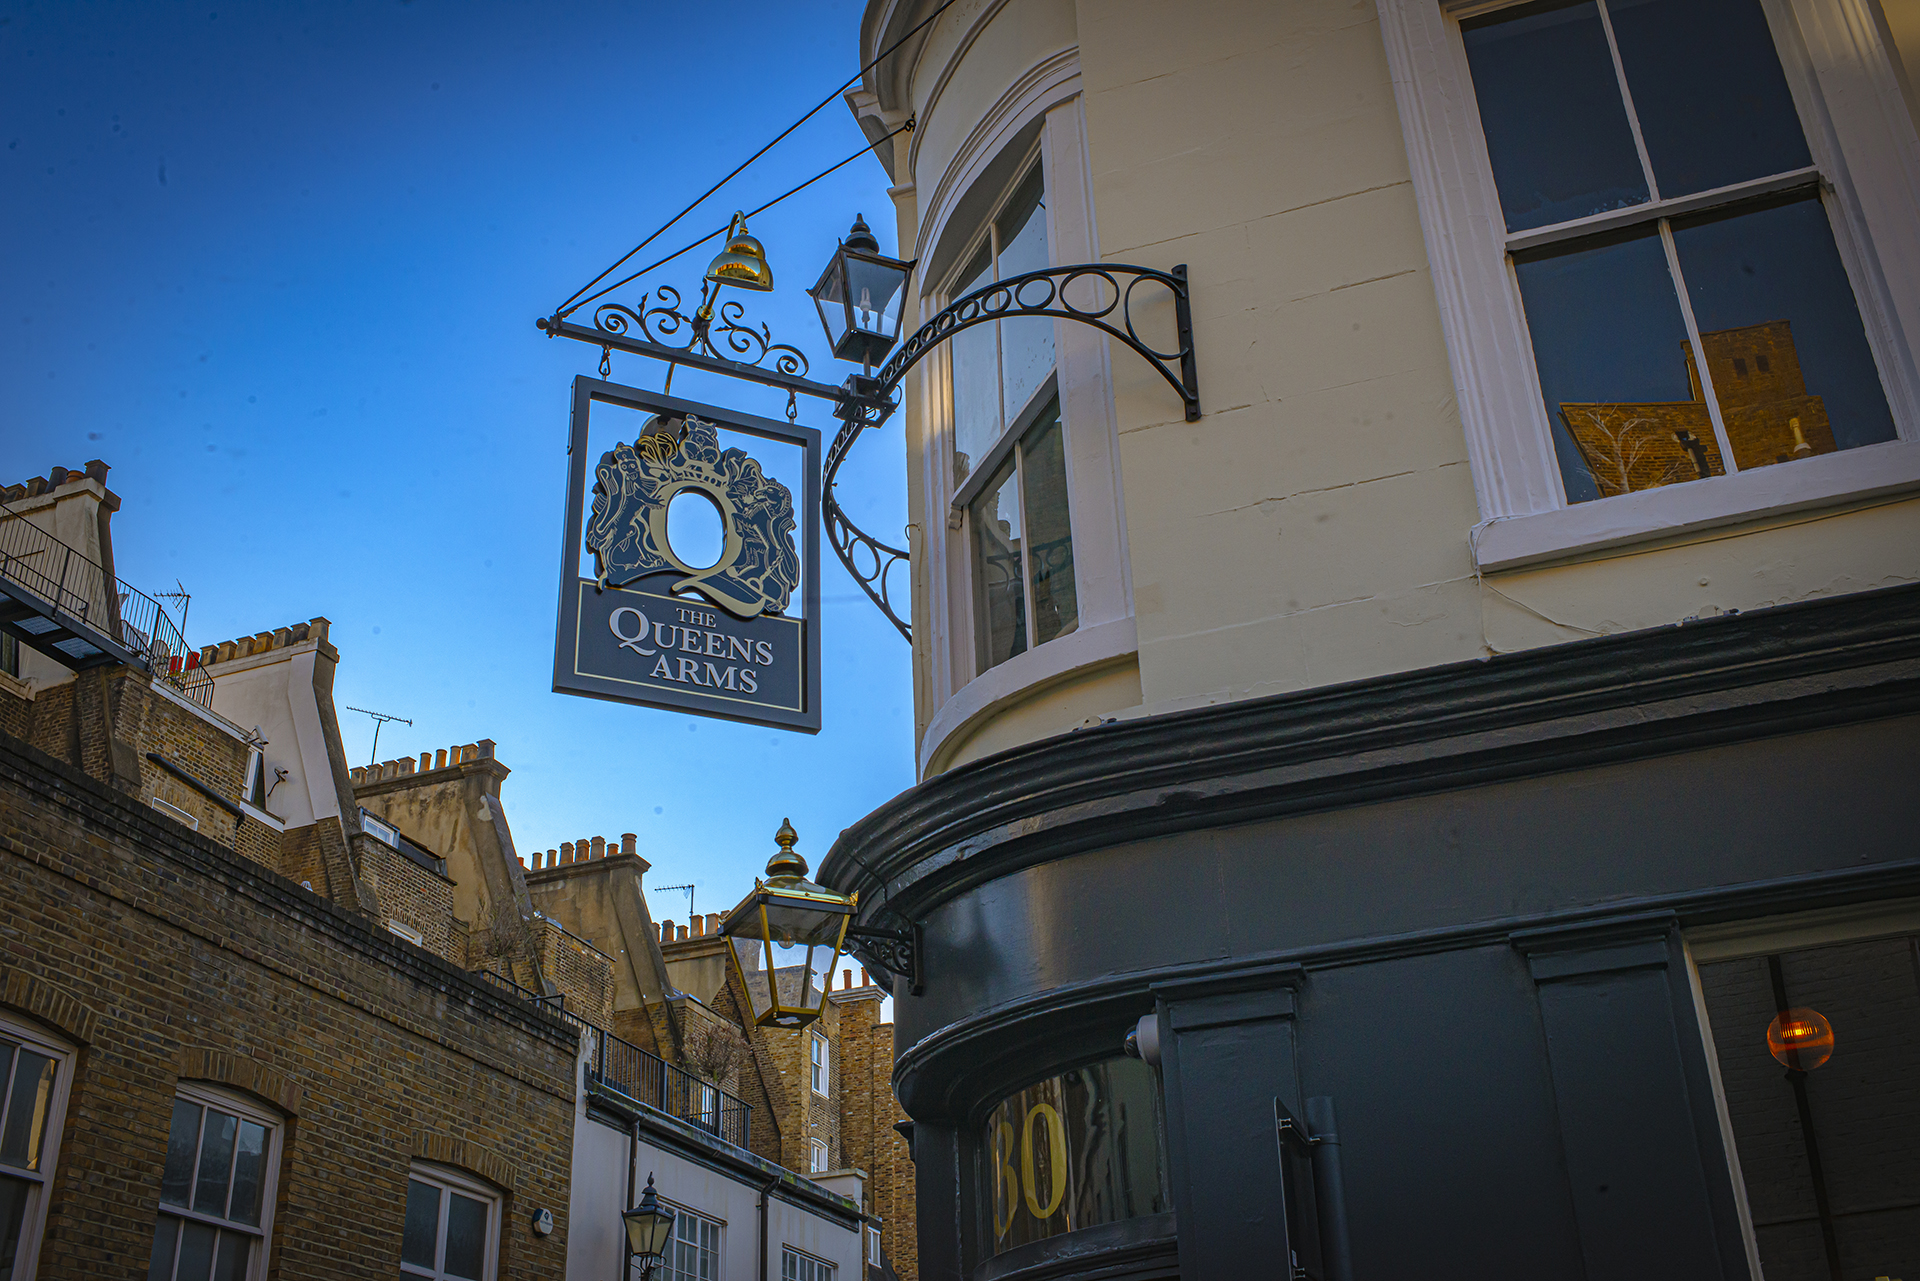 The Queen Arms Pub signage